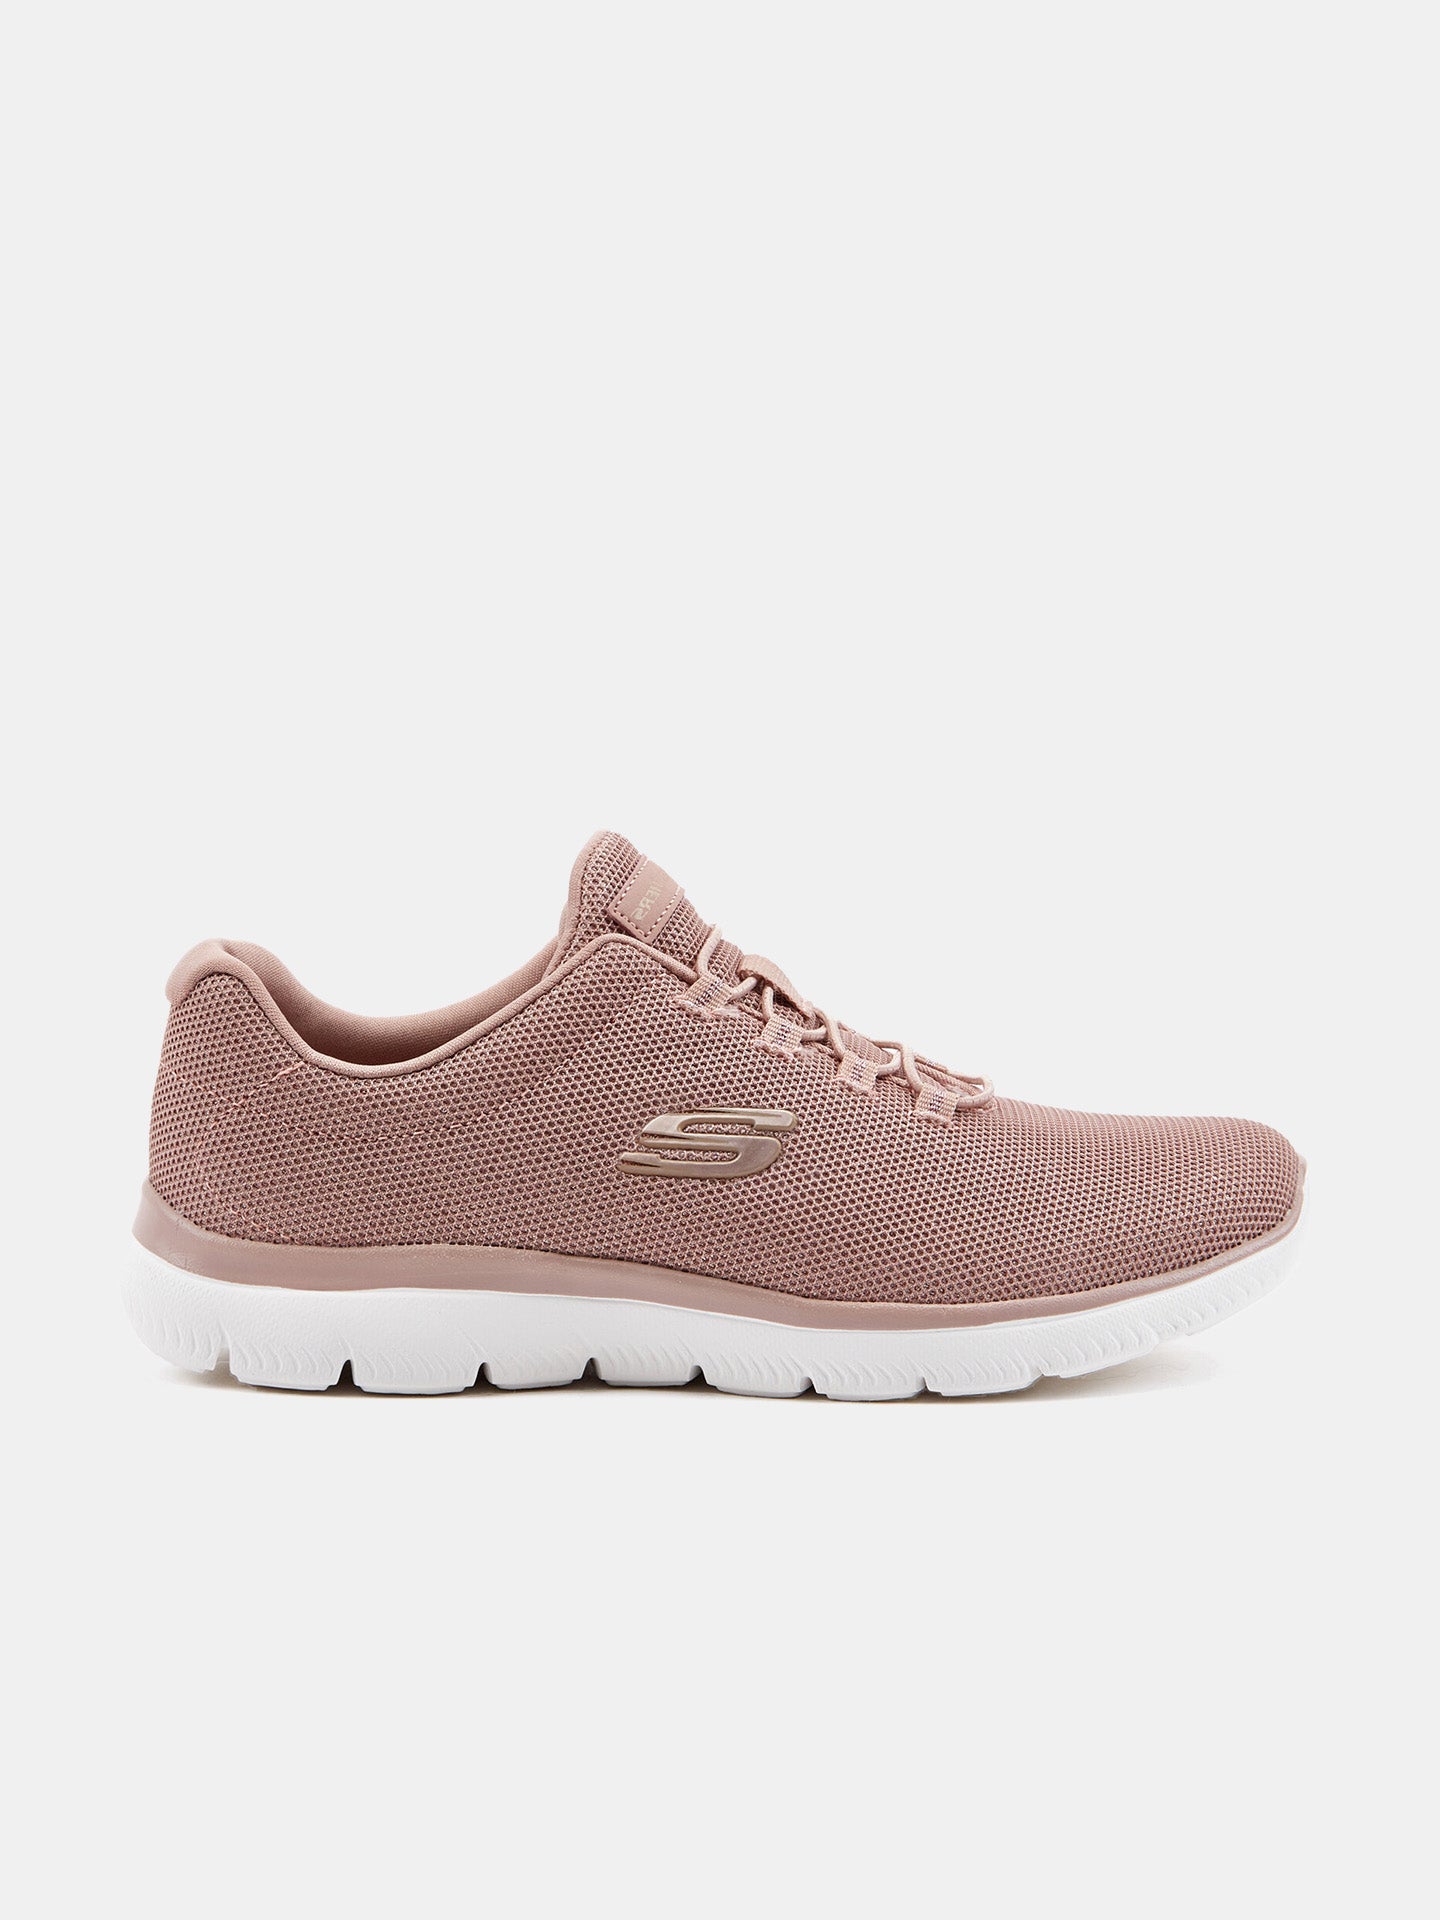 Skechers Women's Summits - Classic Touch Trainers